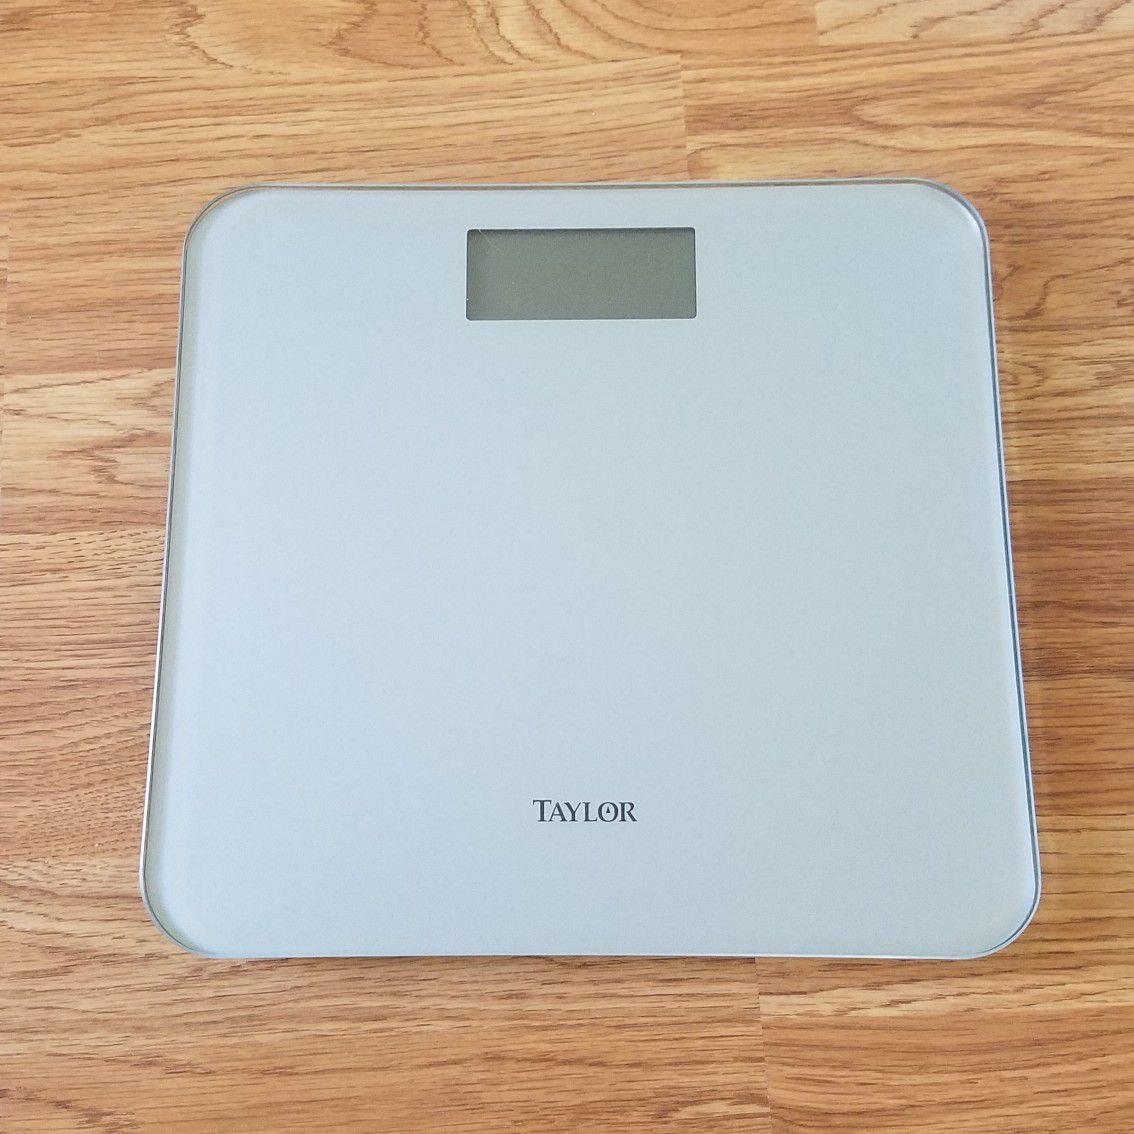 Taylor Glass Lithium Electronic Scale